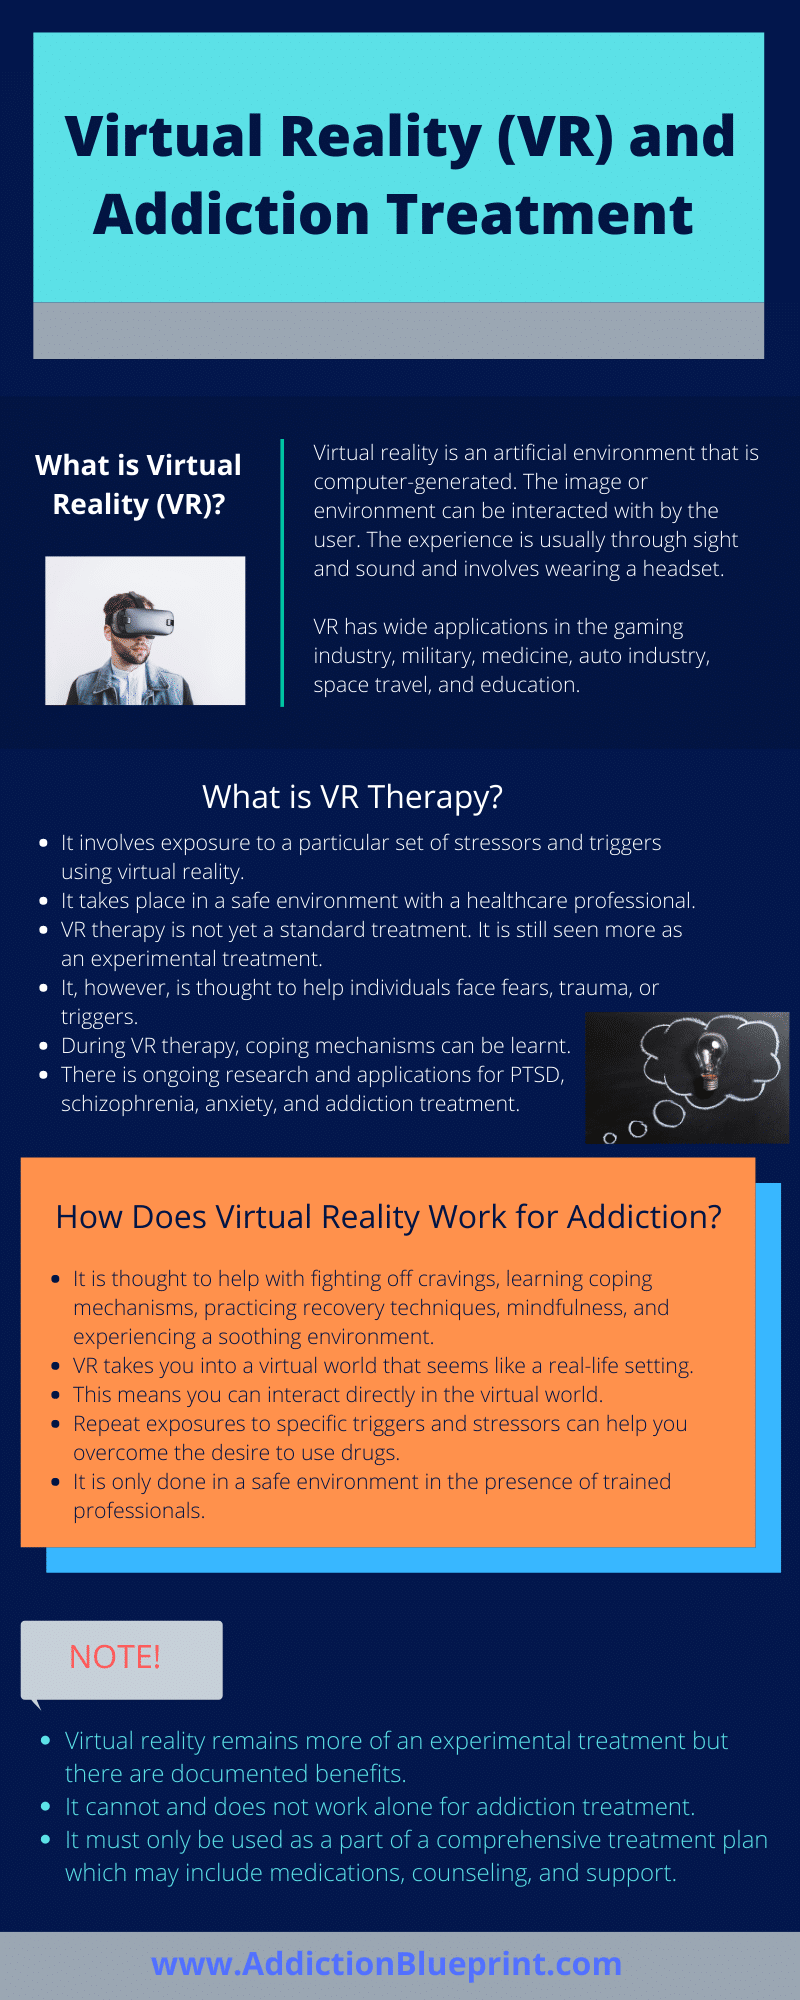 Virtual Reality (VR) and addiction treatment